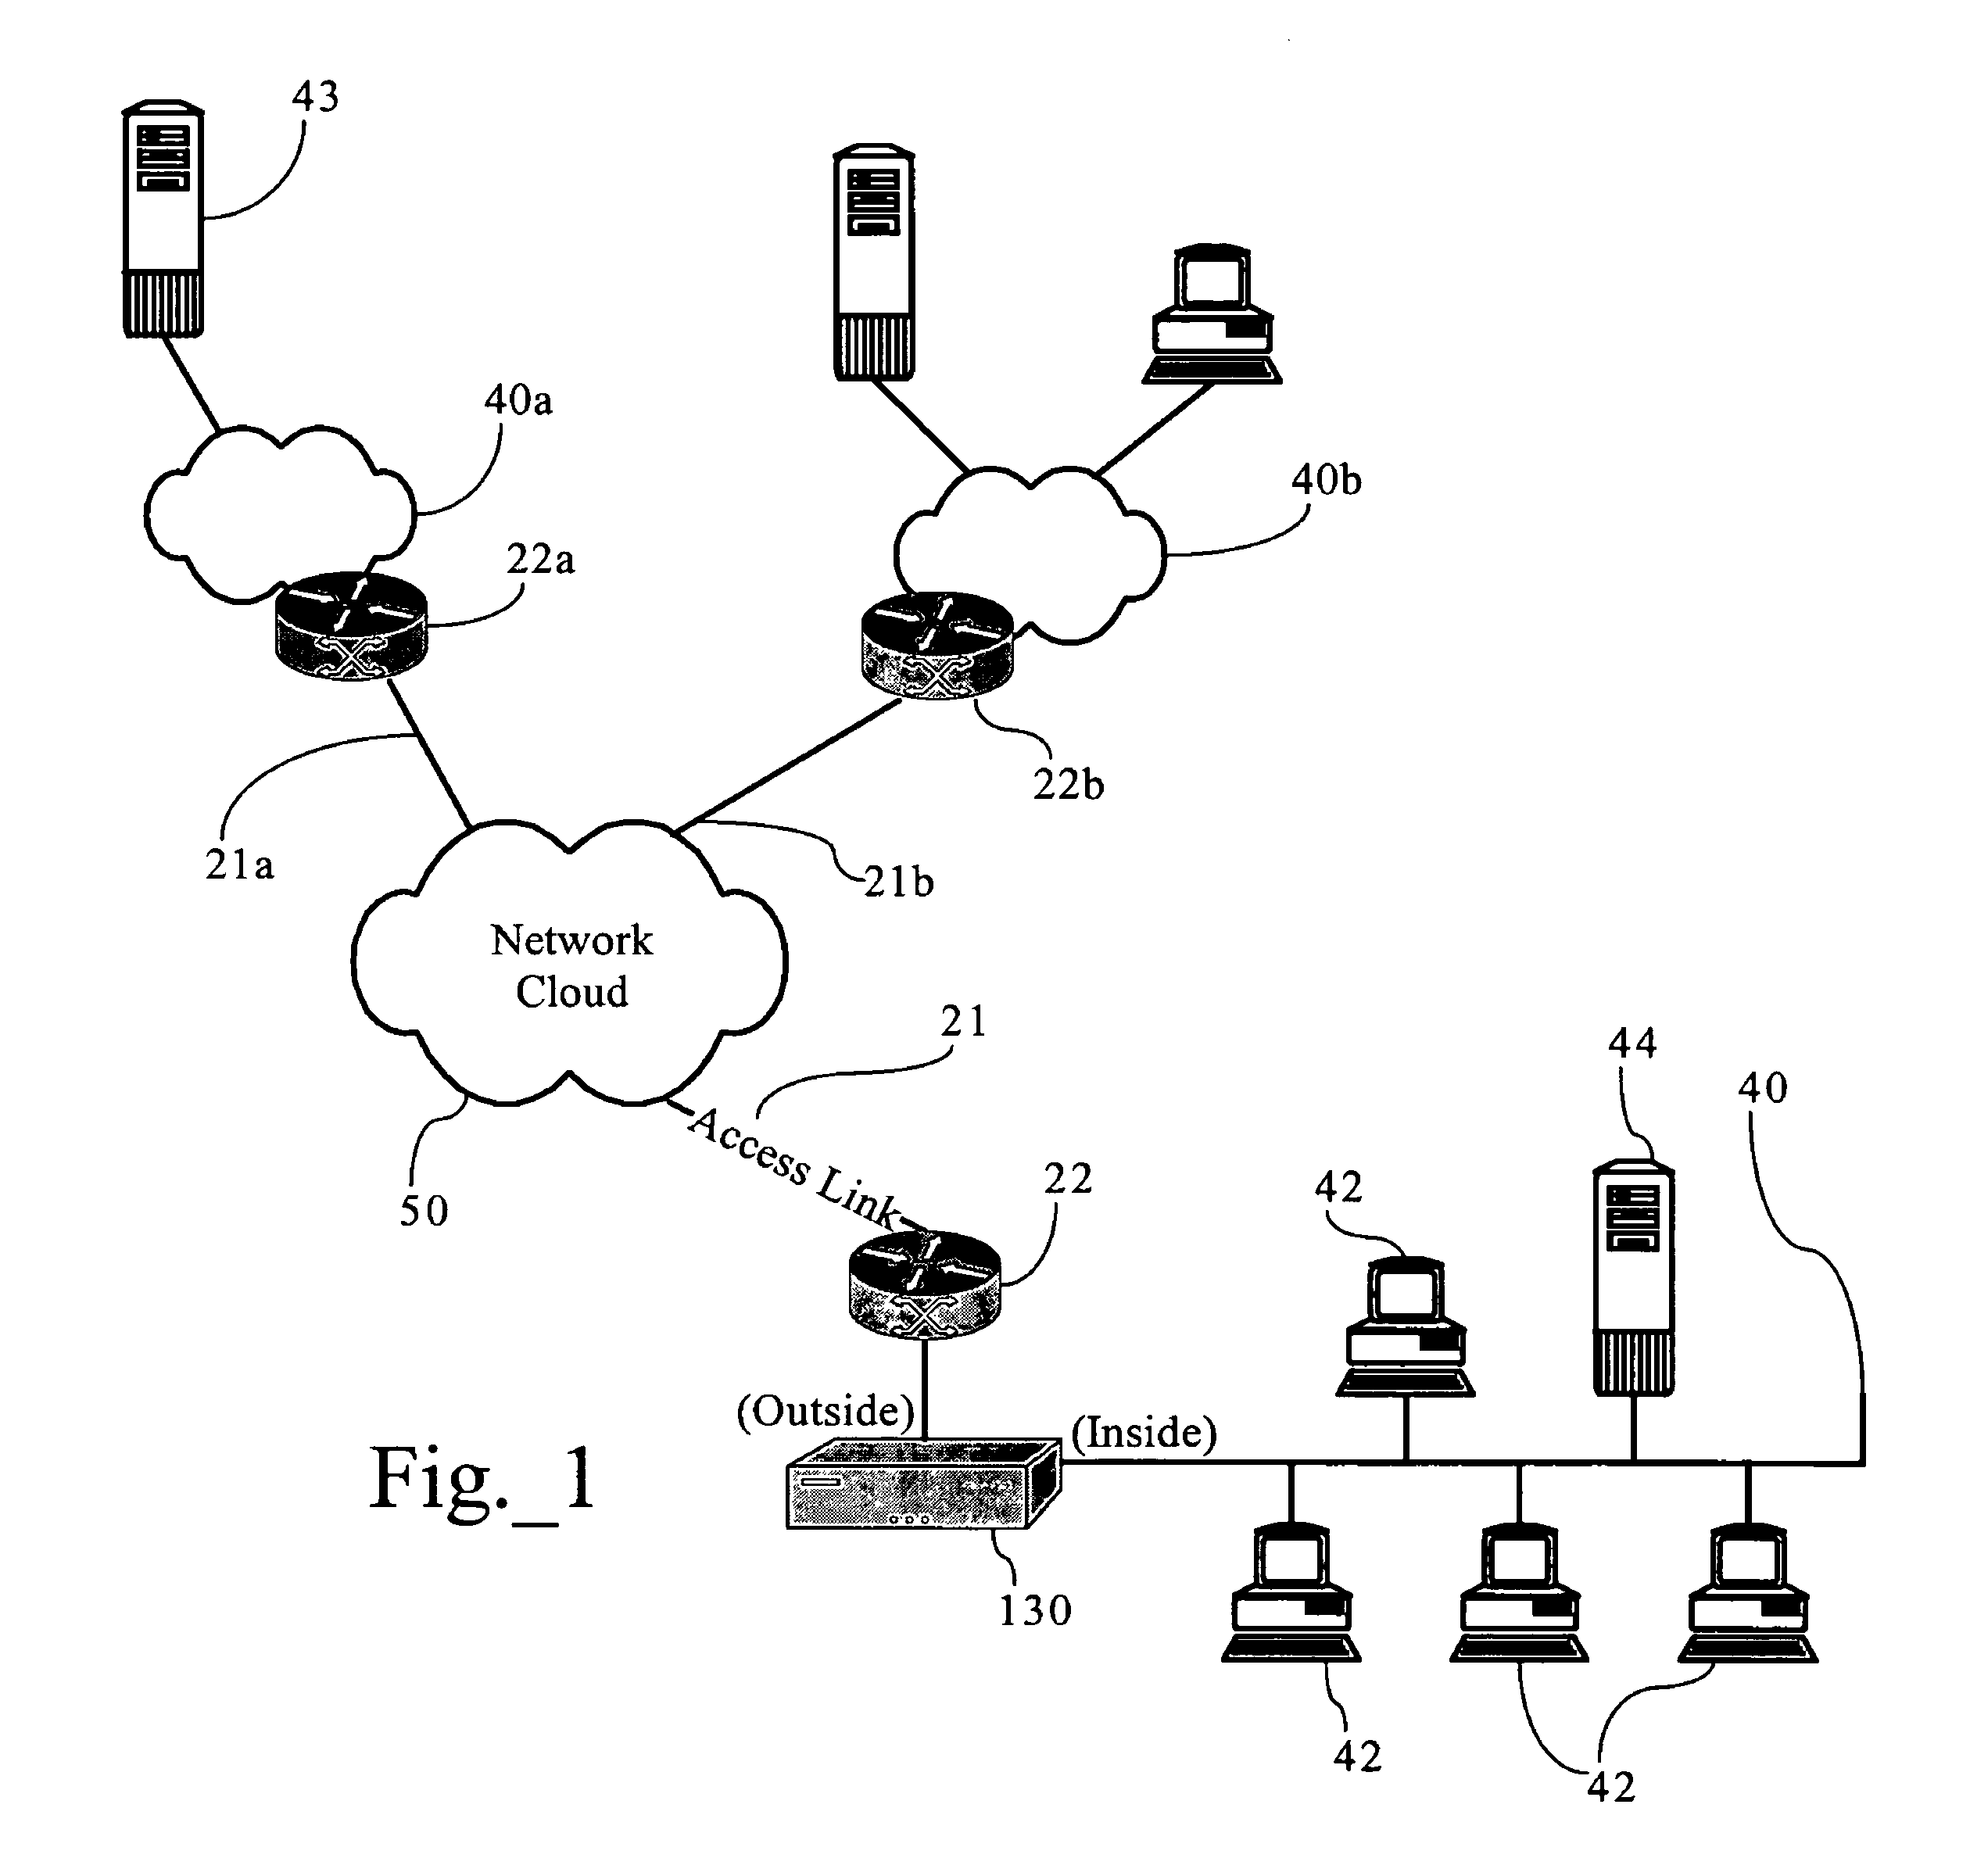 Adaptive correlation of service level agreement and network application performance